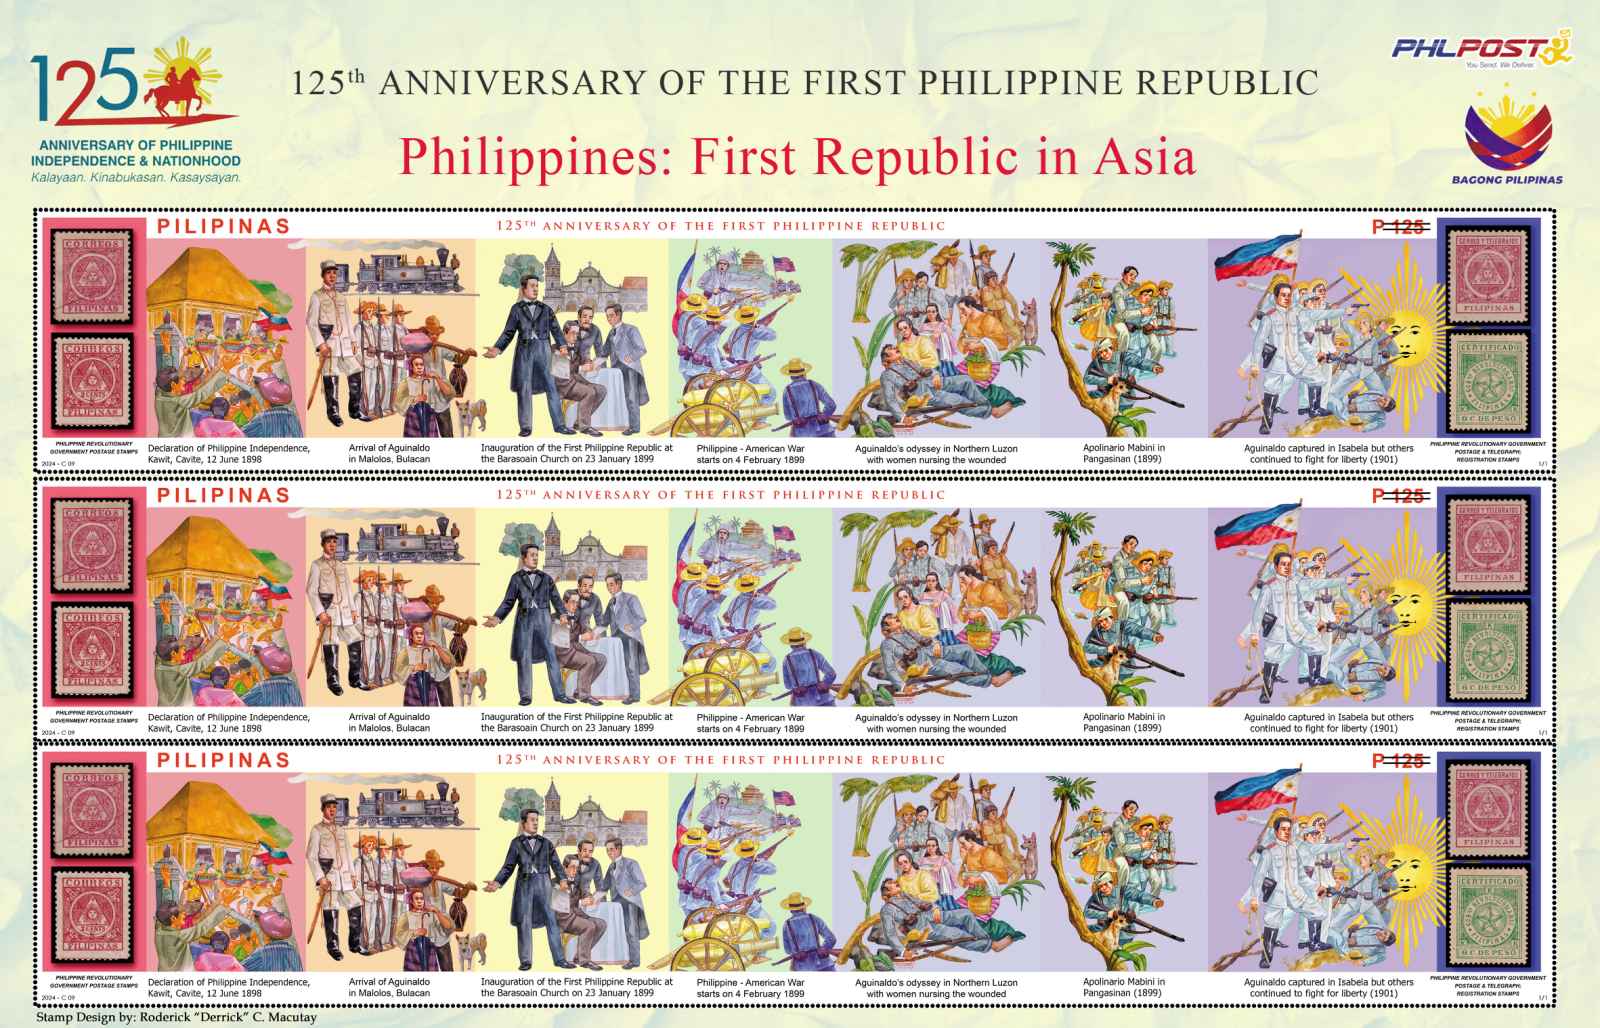 PHLPost issues Philippine longest stamp and country’s bid for Guinness World Records